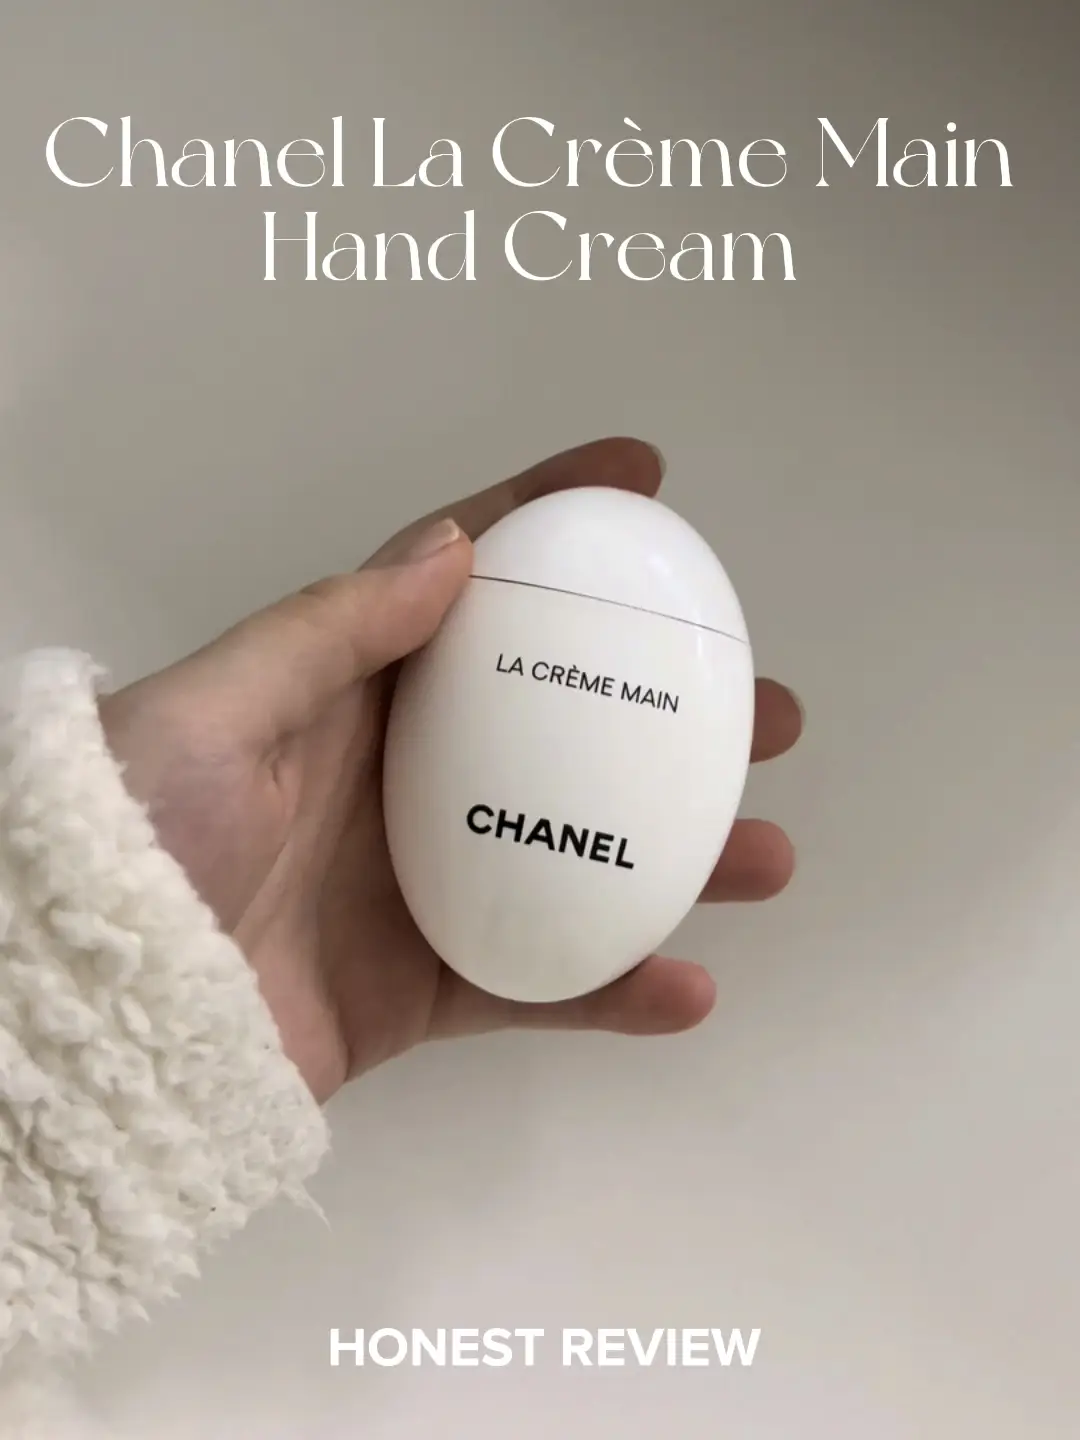 Luxury hand cream review, Gallery posted by Joanna Graziano